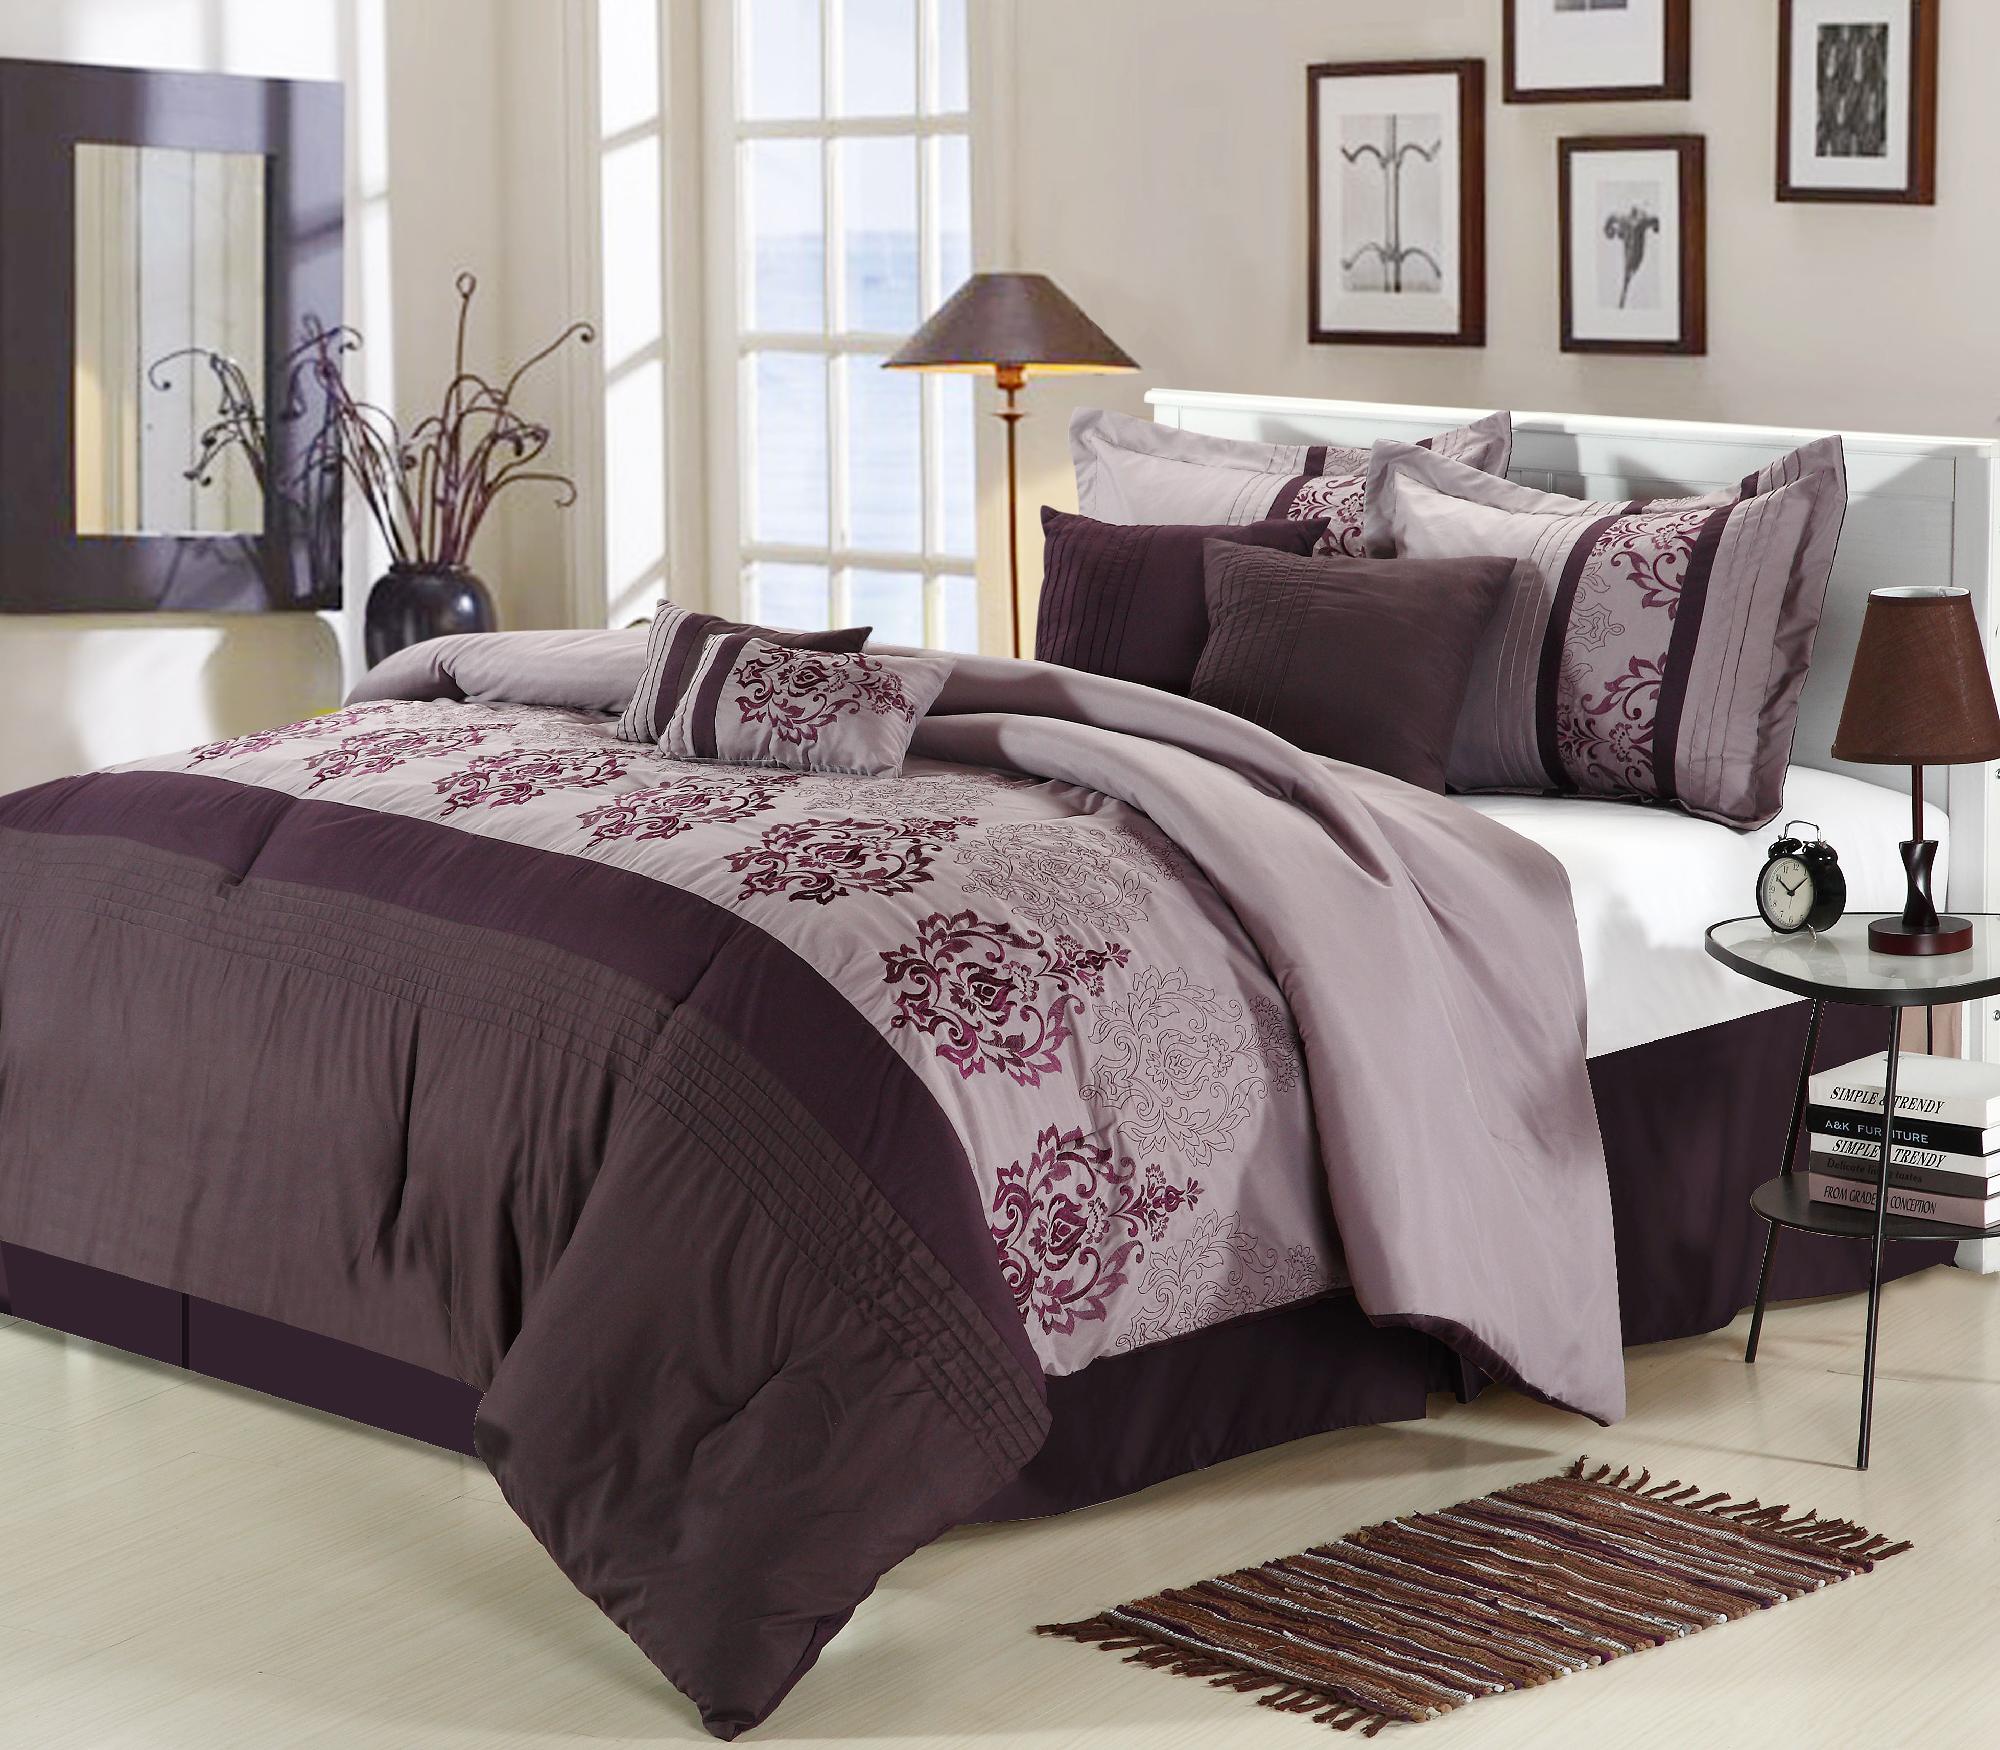 Chic Home Renaissance 12 pc complete bed set Embroidered Comforter Set